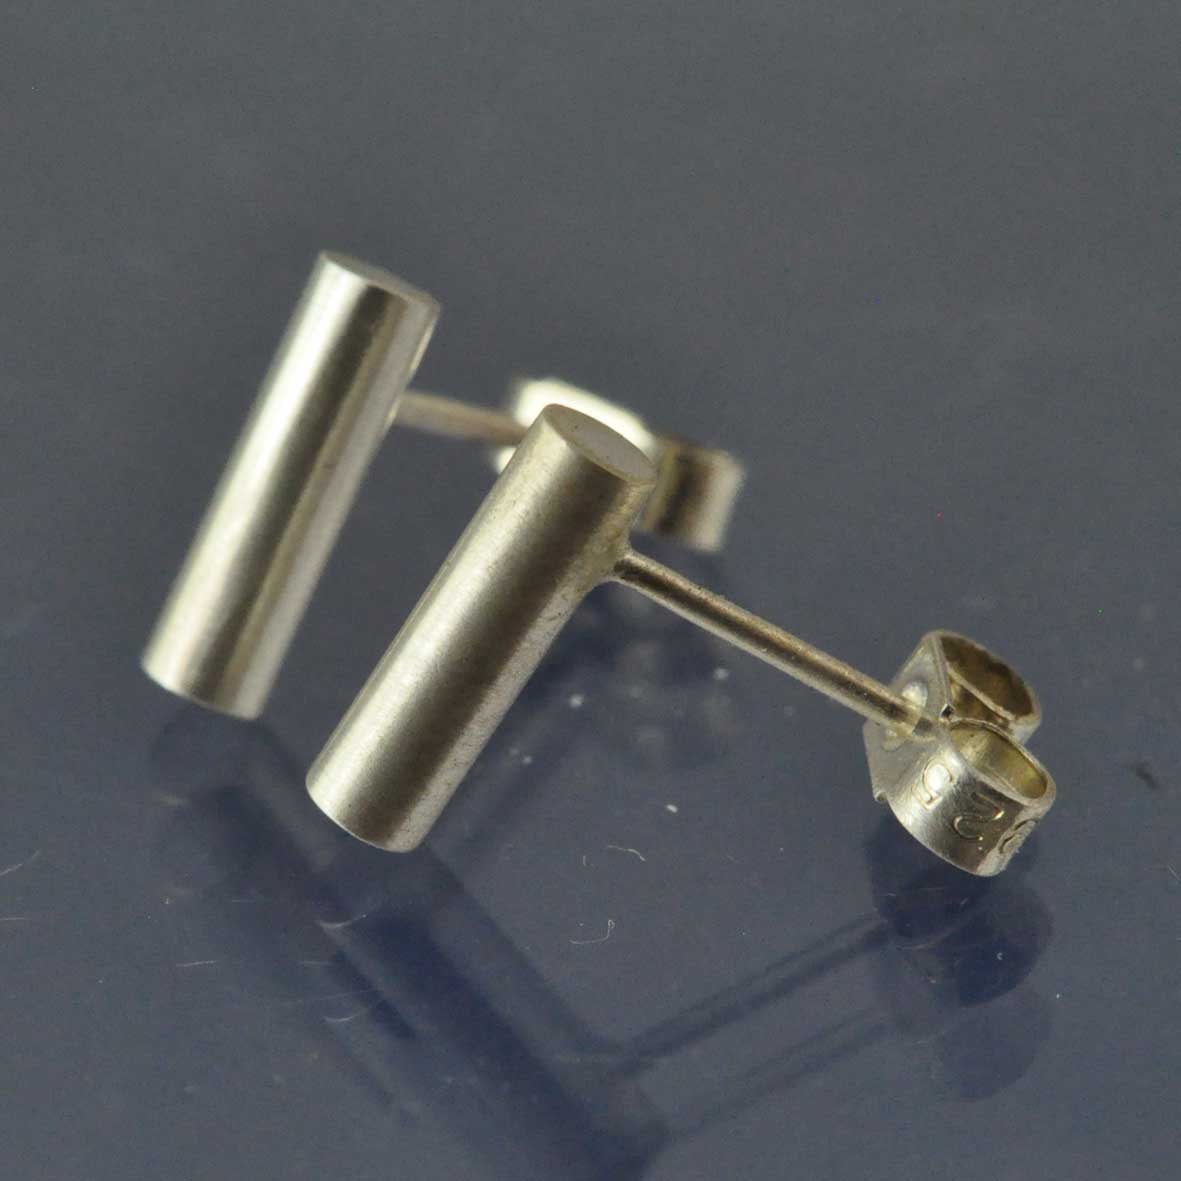 Cremation Ash Earrings - Cylinder Studs Earring by Chris Parry Jewellery